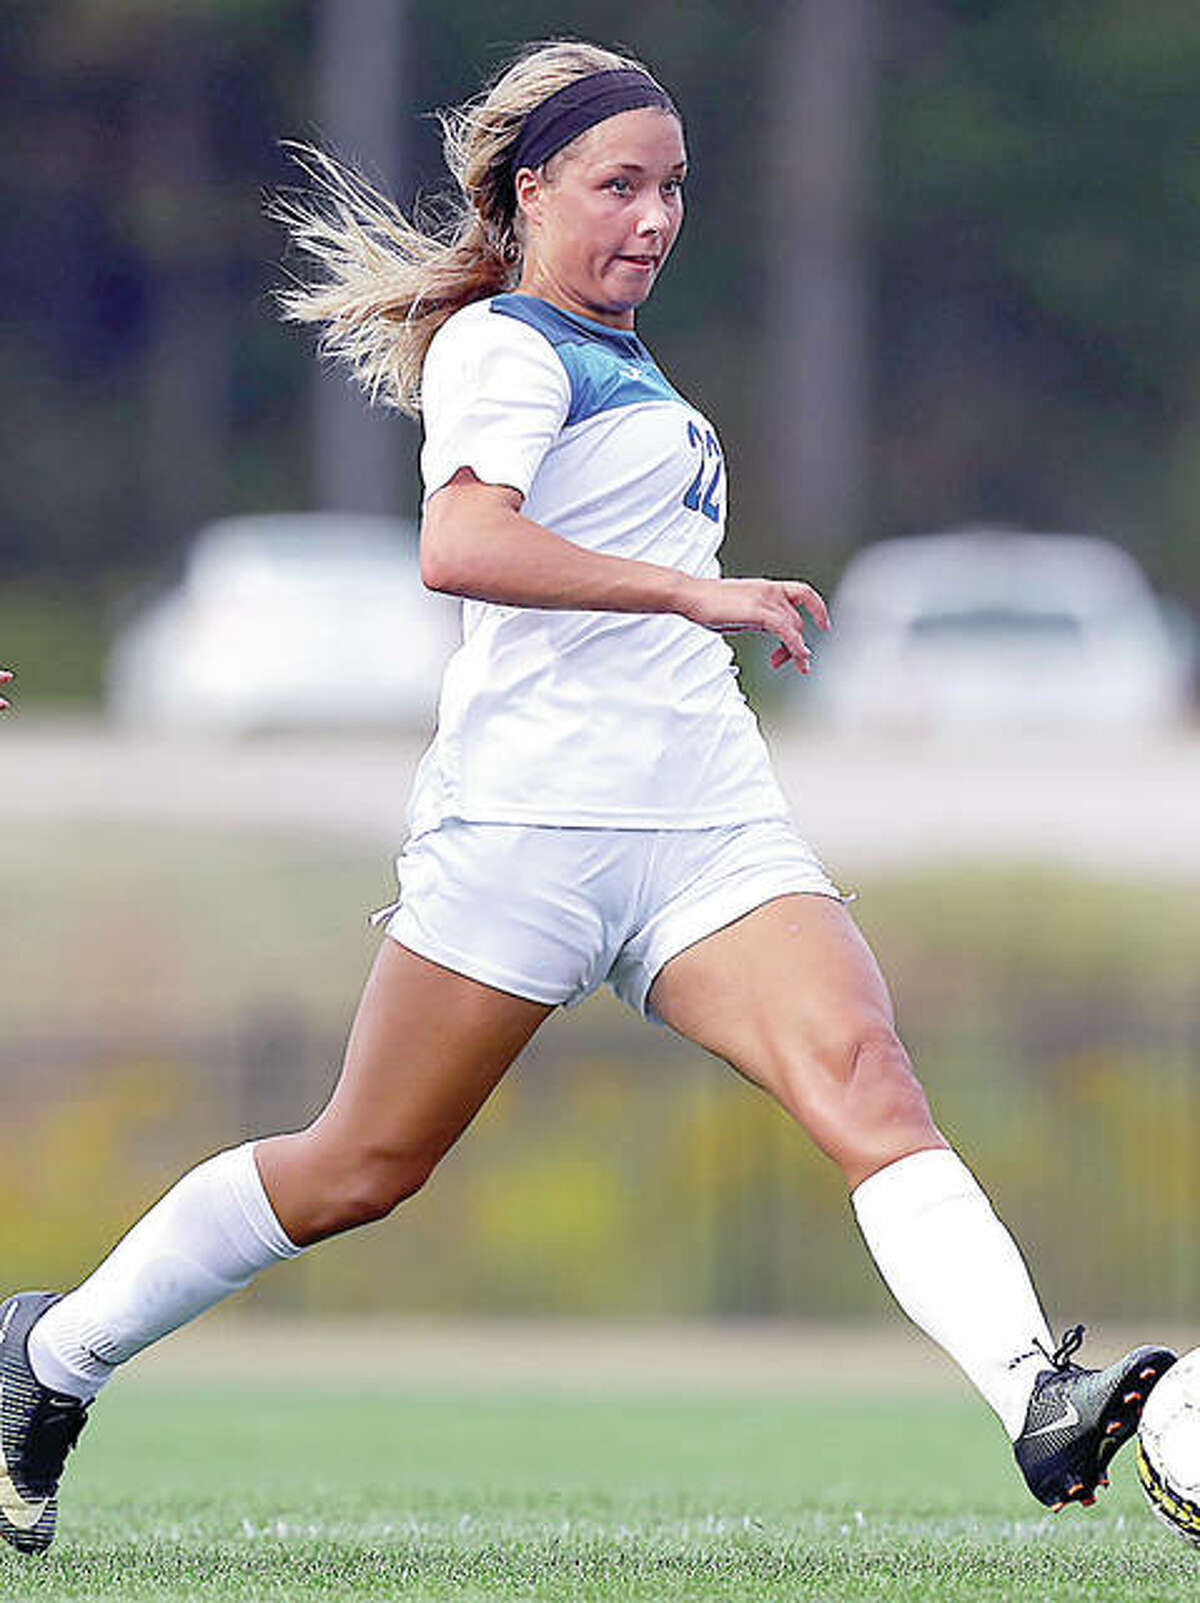 LCCC’s Audrey Andrzejewski, her team’s leading scorer with 29 goals, suffered a knee injury in Saturday’s 2-1 district playoff victory over St. Charles. LCCC qualified for next week’s national tourney with the victory.